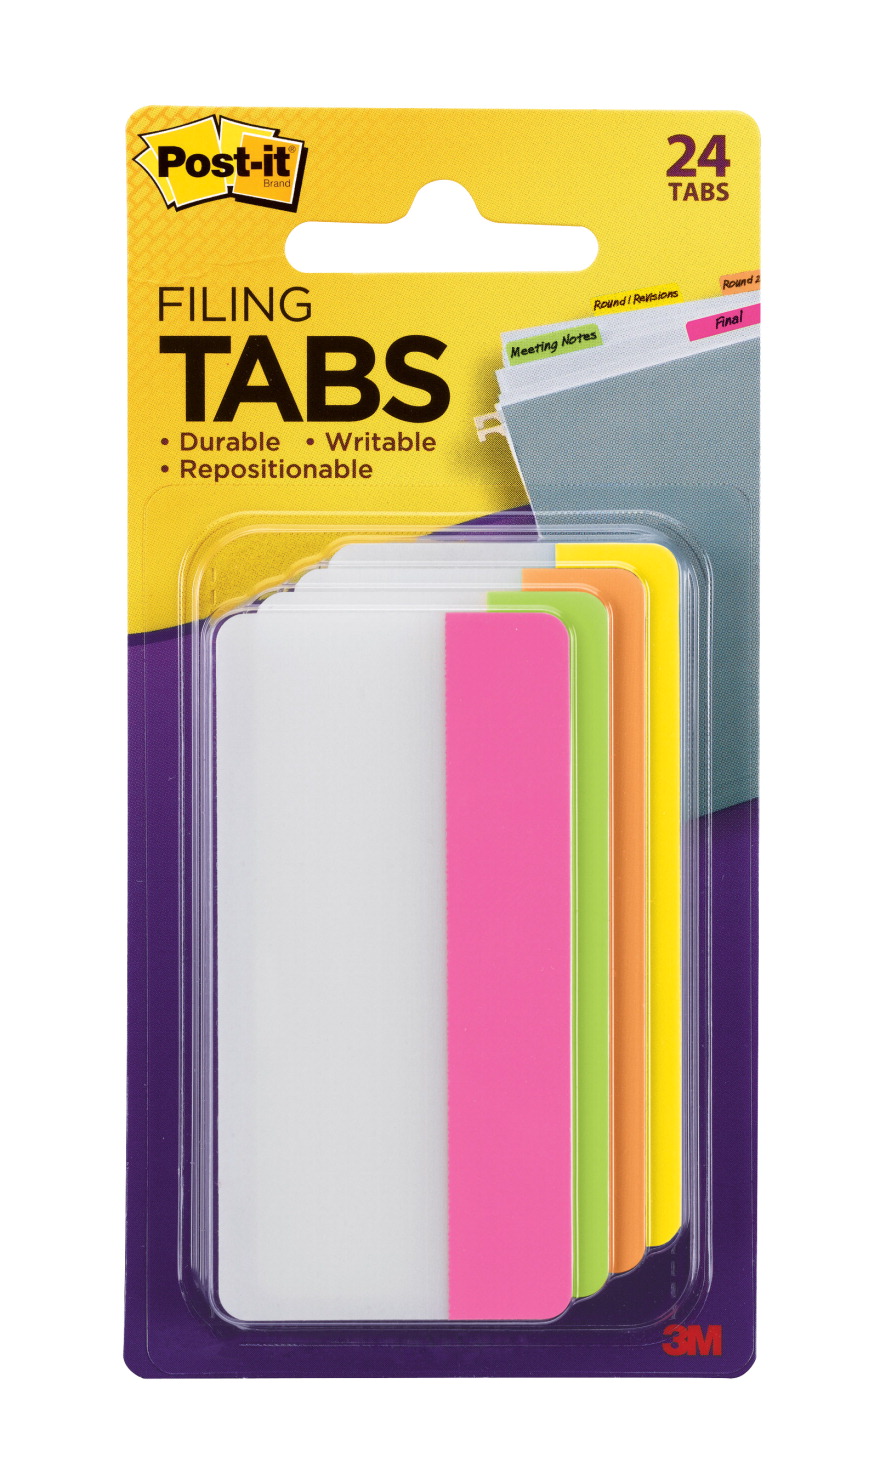 Sticky Note 3 X 1.5 In. Filing Tab, Pack Of 24